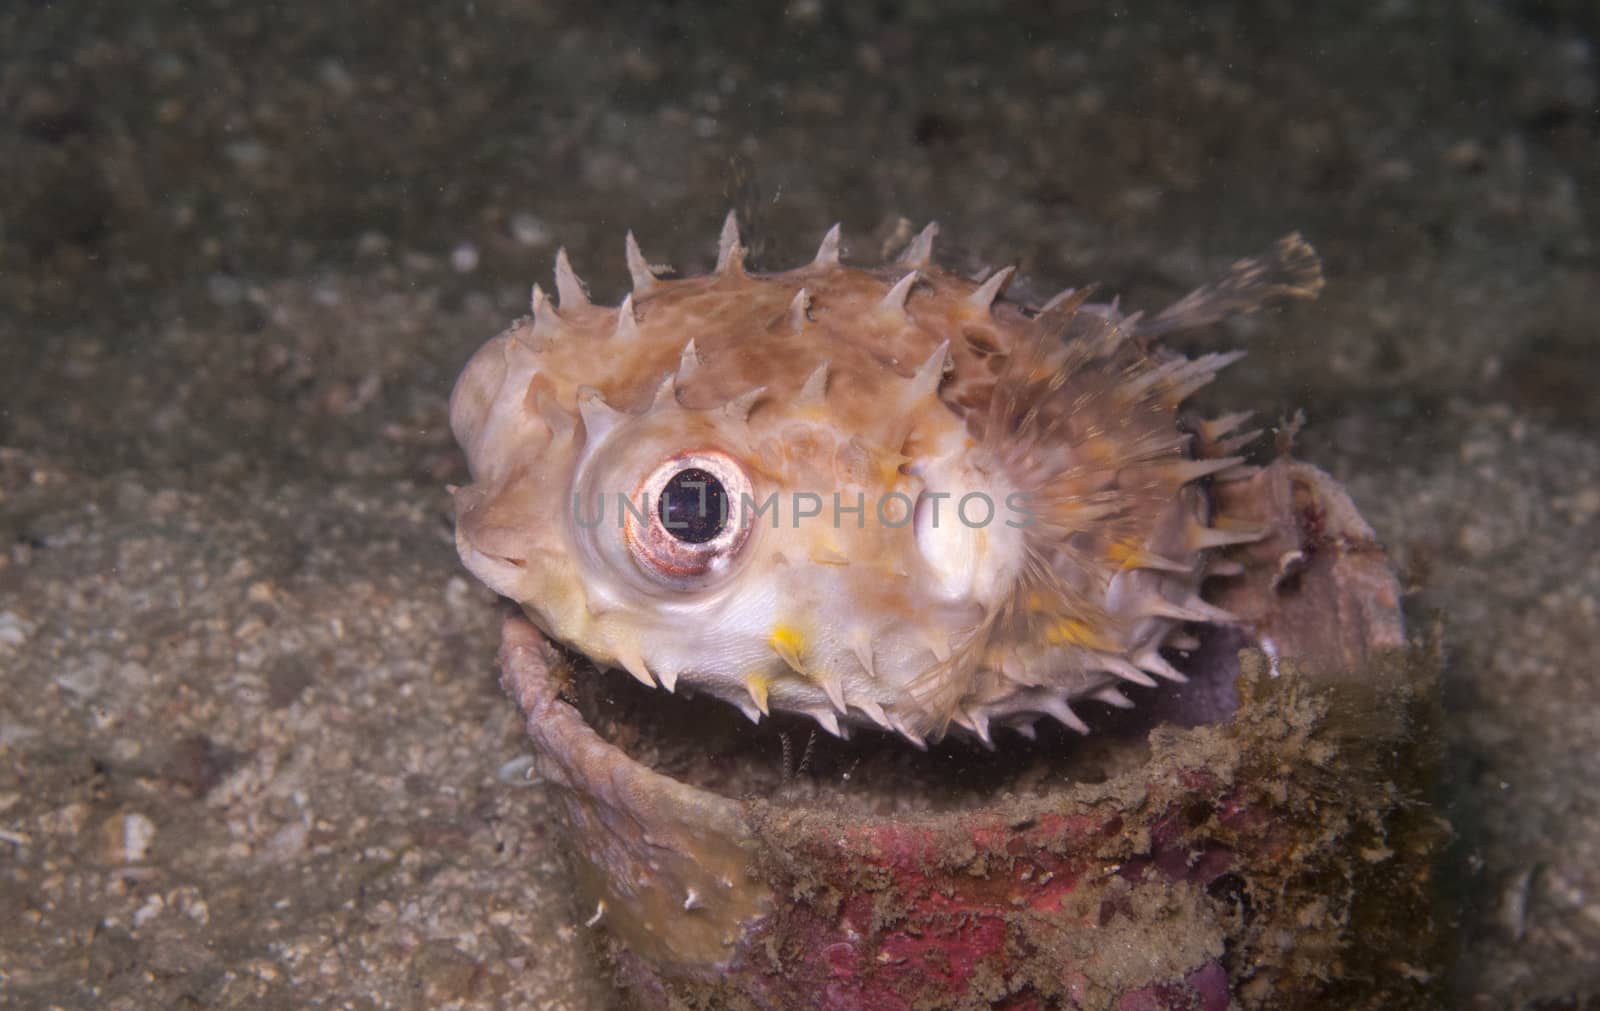 a small burrfish or porcupine puffer fish in a cup on the sand